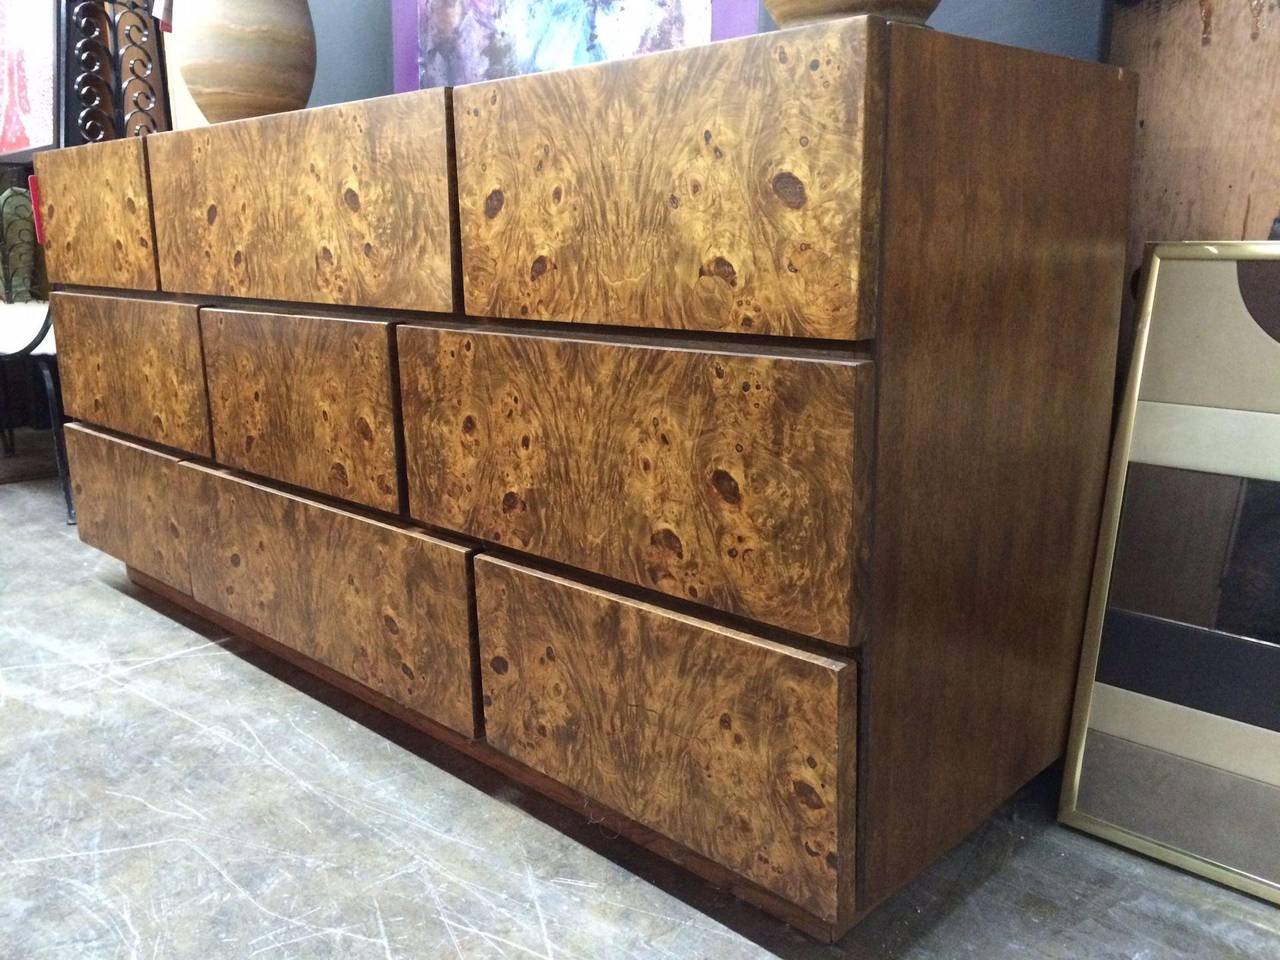 A dresser by Lane Furniture Company with burl wood flat drawer front panels. This handsome fella has nine drawers that are in a brick pattern which makes it unique. There is ample storage for all you personal belongings. There are some minor nicks